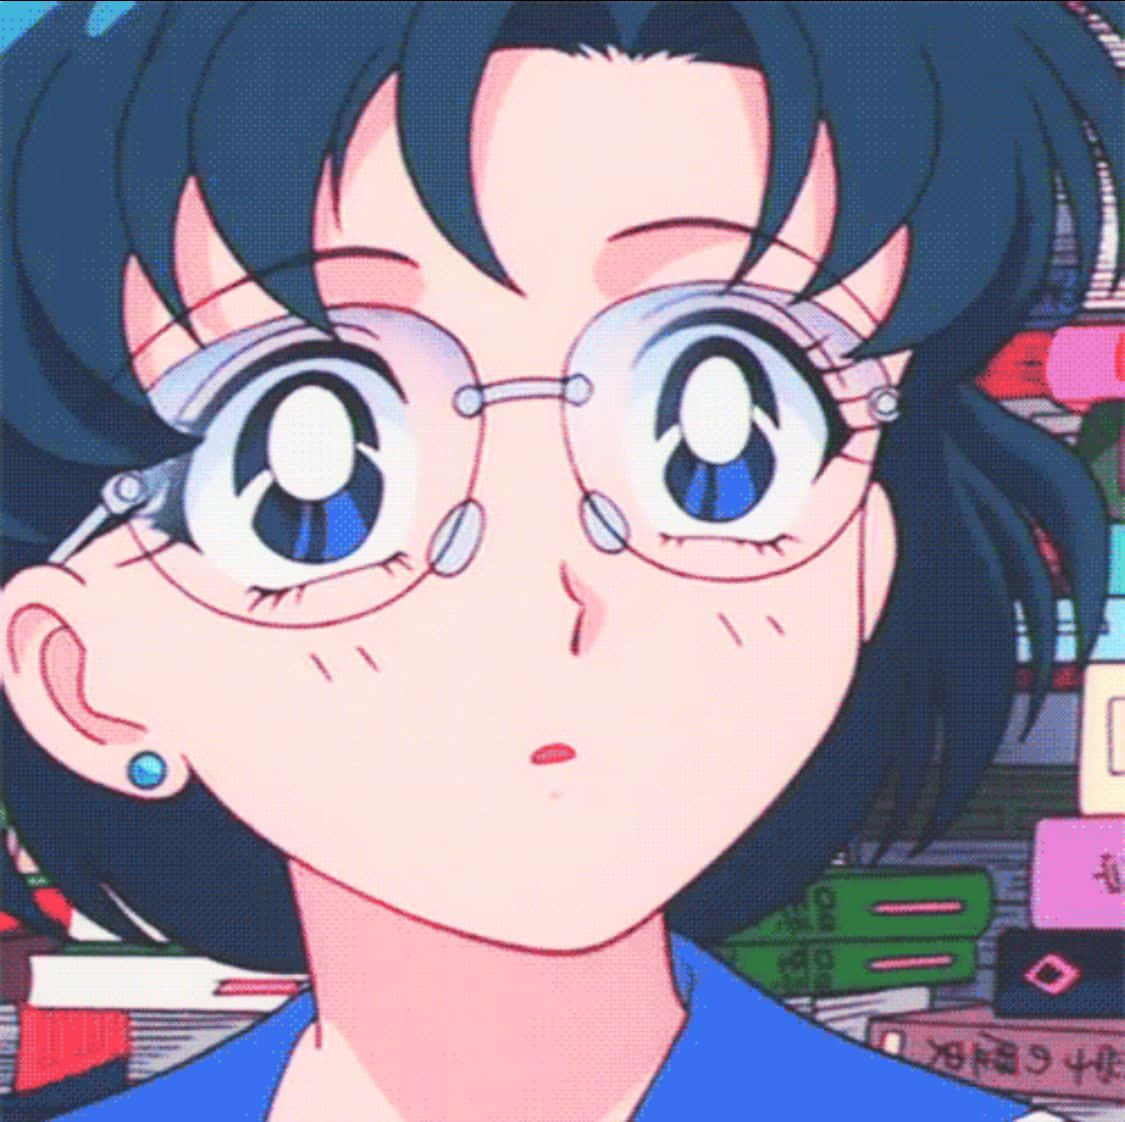 A Girl With Glasses In Front Of A Book Shelf